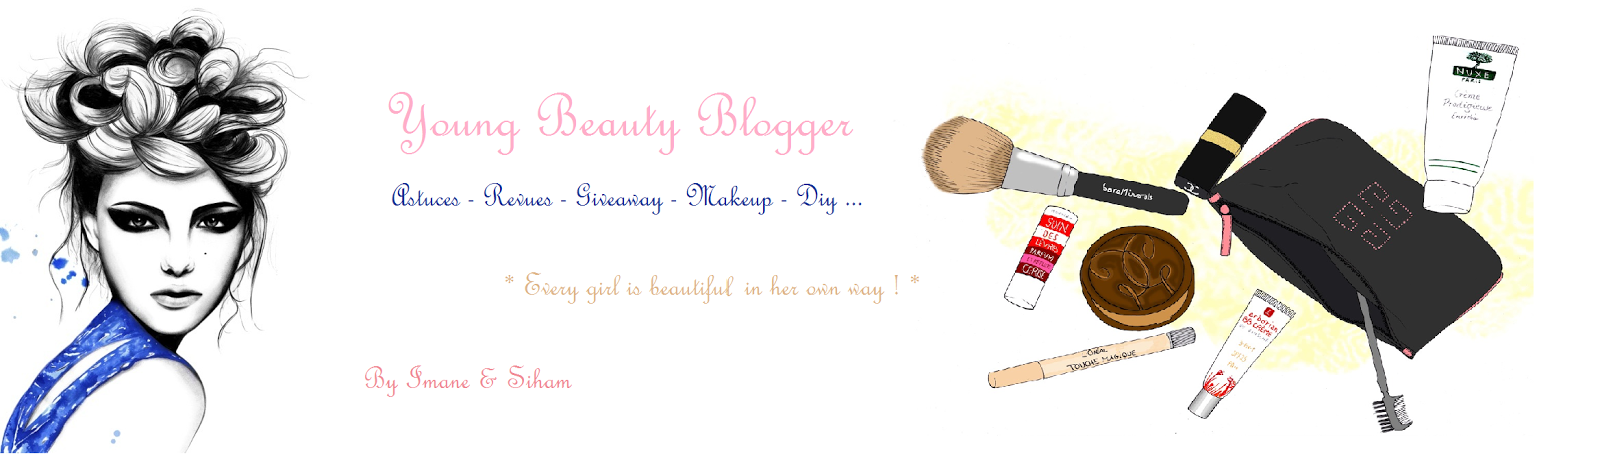 Young Beauty Blogger